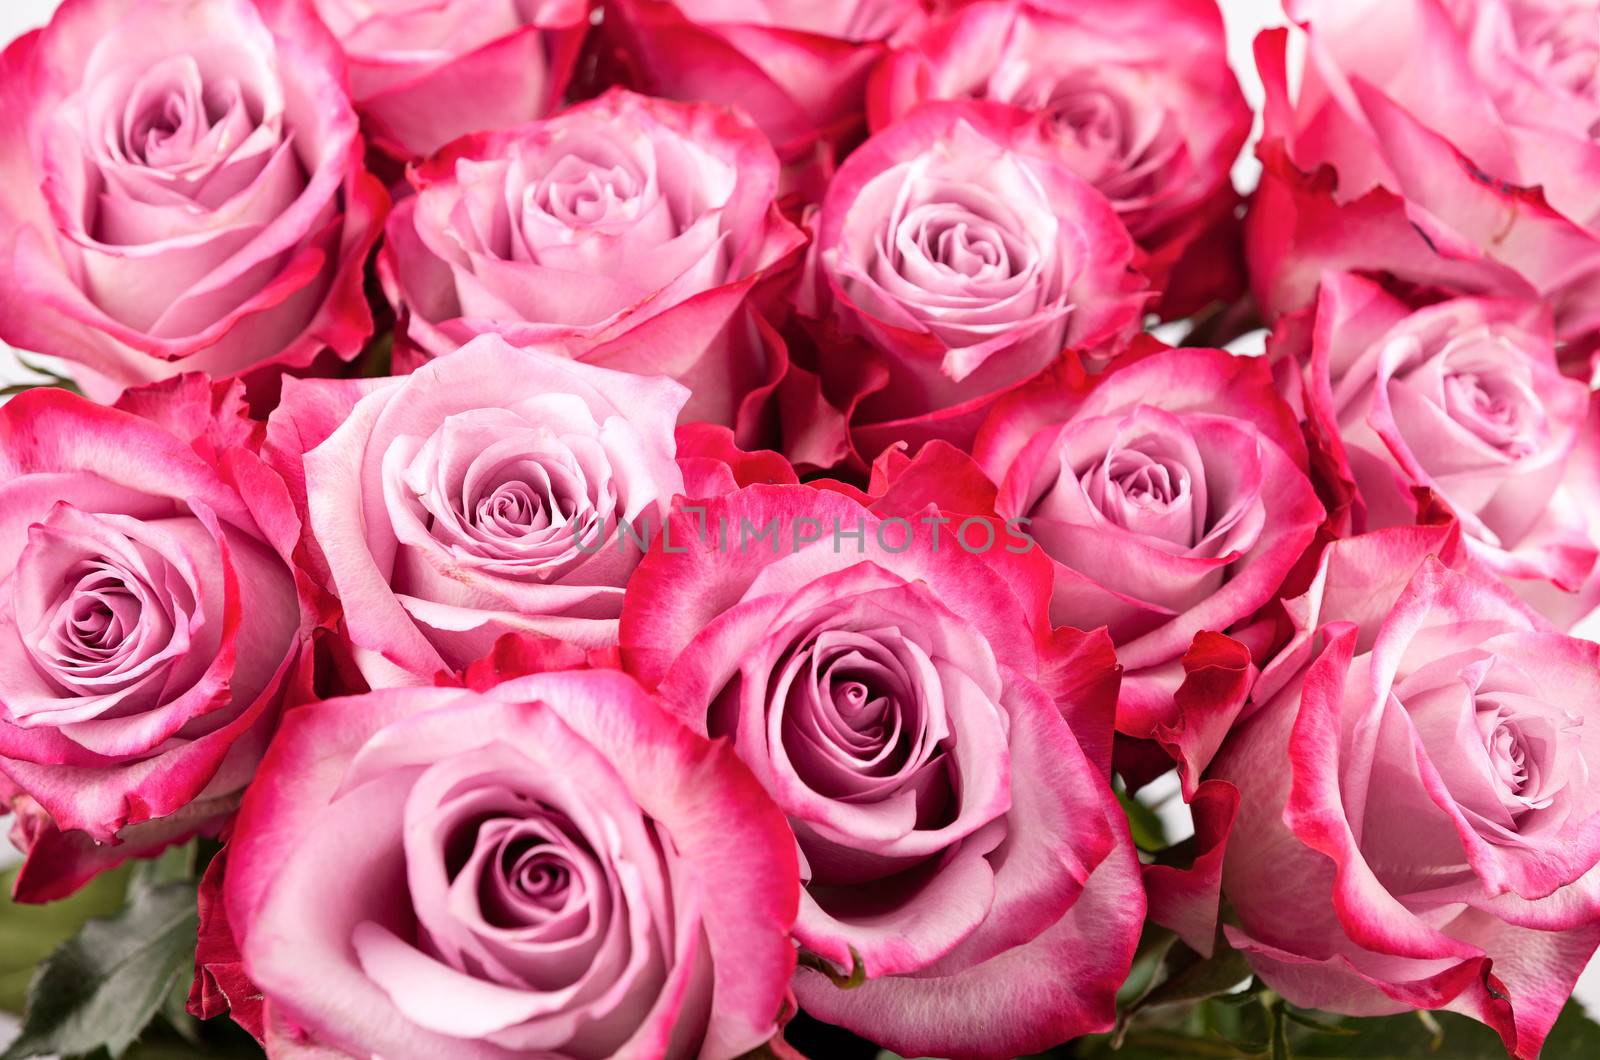 Closeup view of bunch of a pink roses